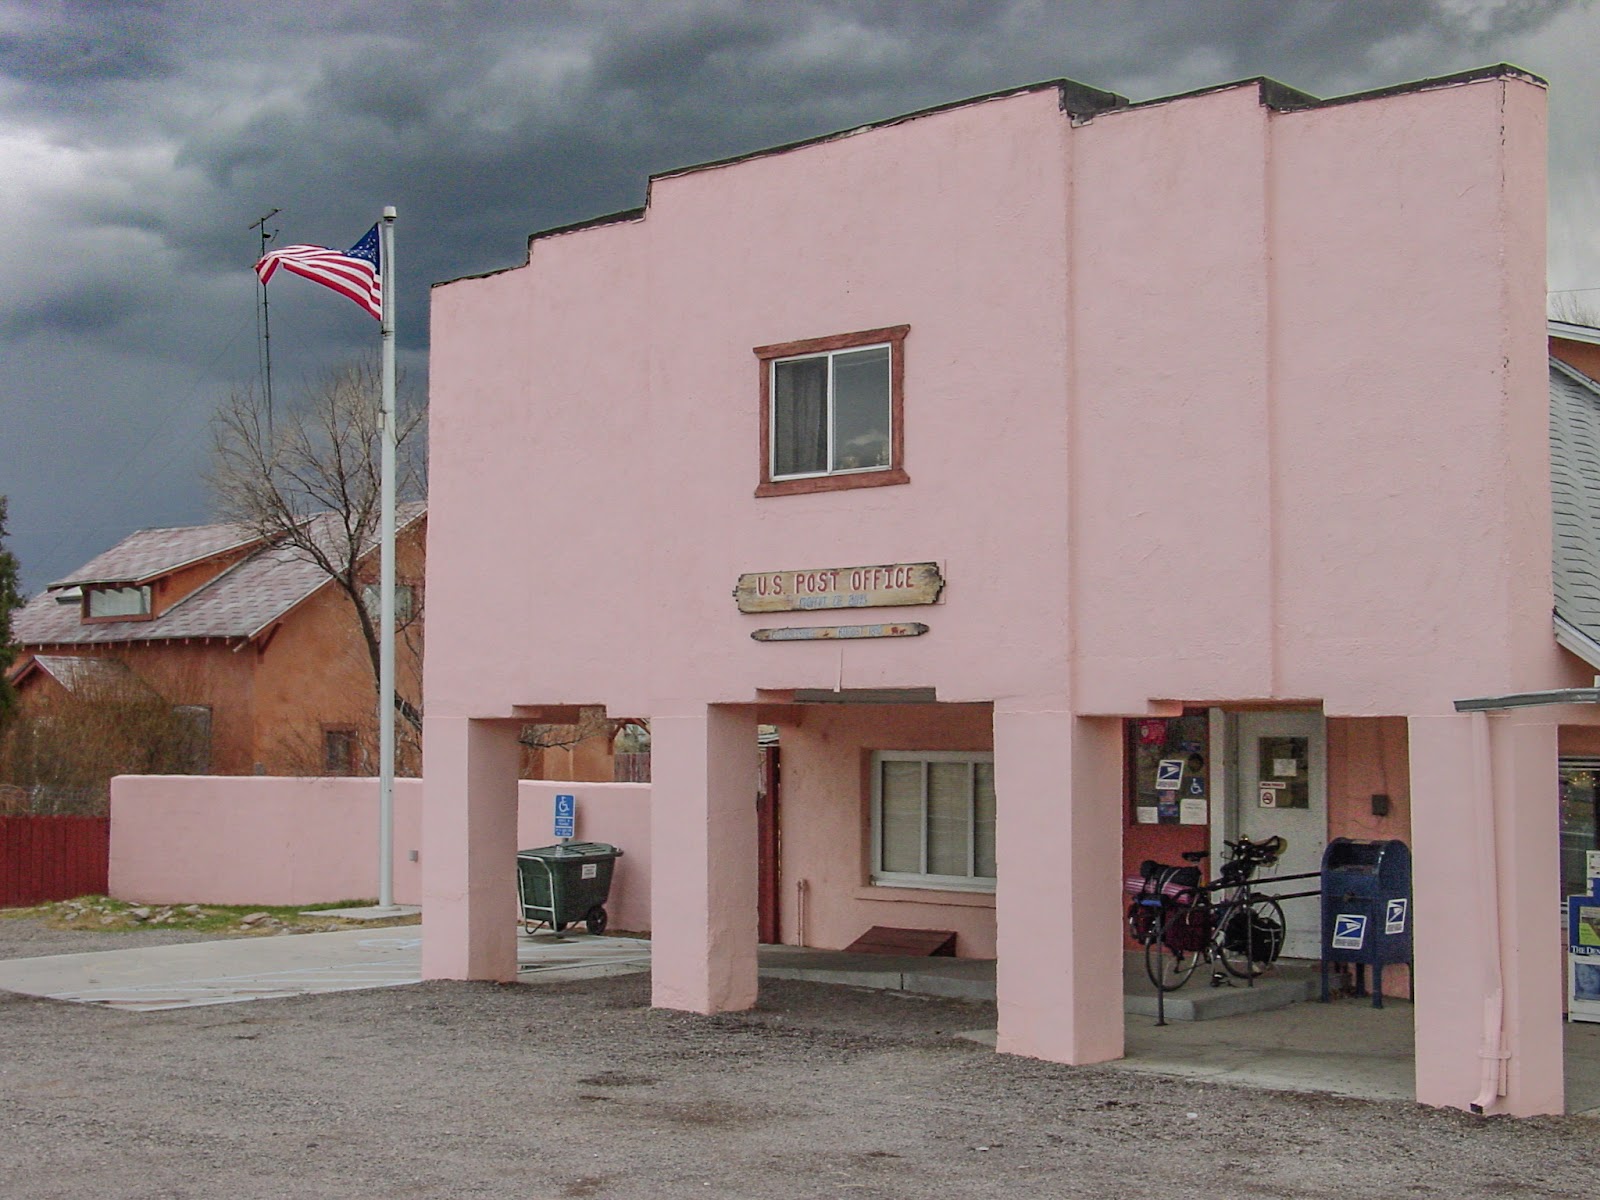 A pink two-story building with American flag against a dark sky.